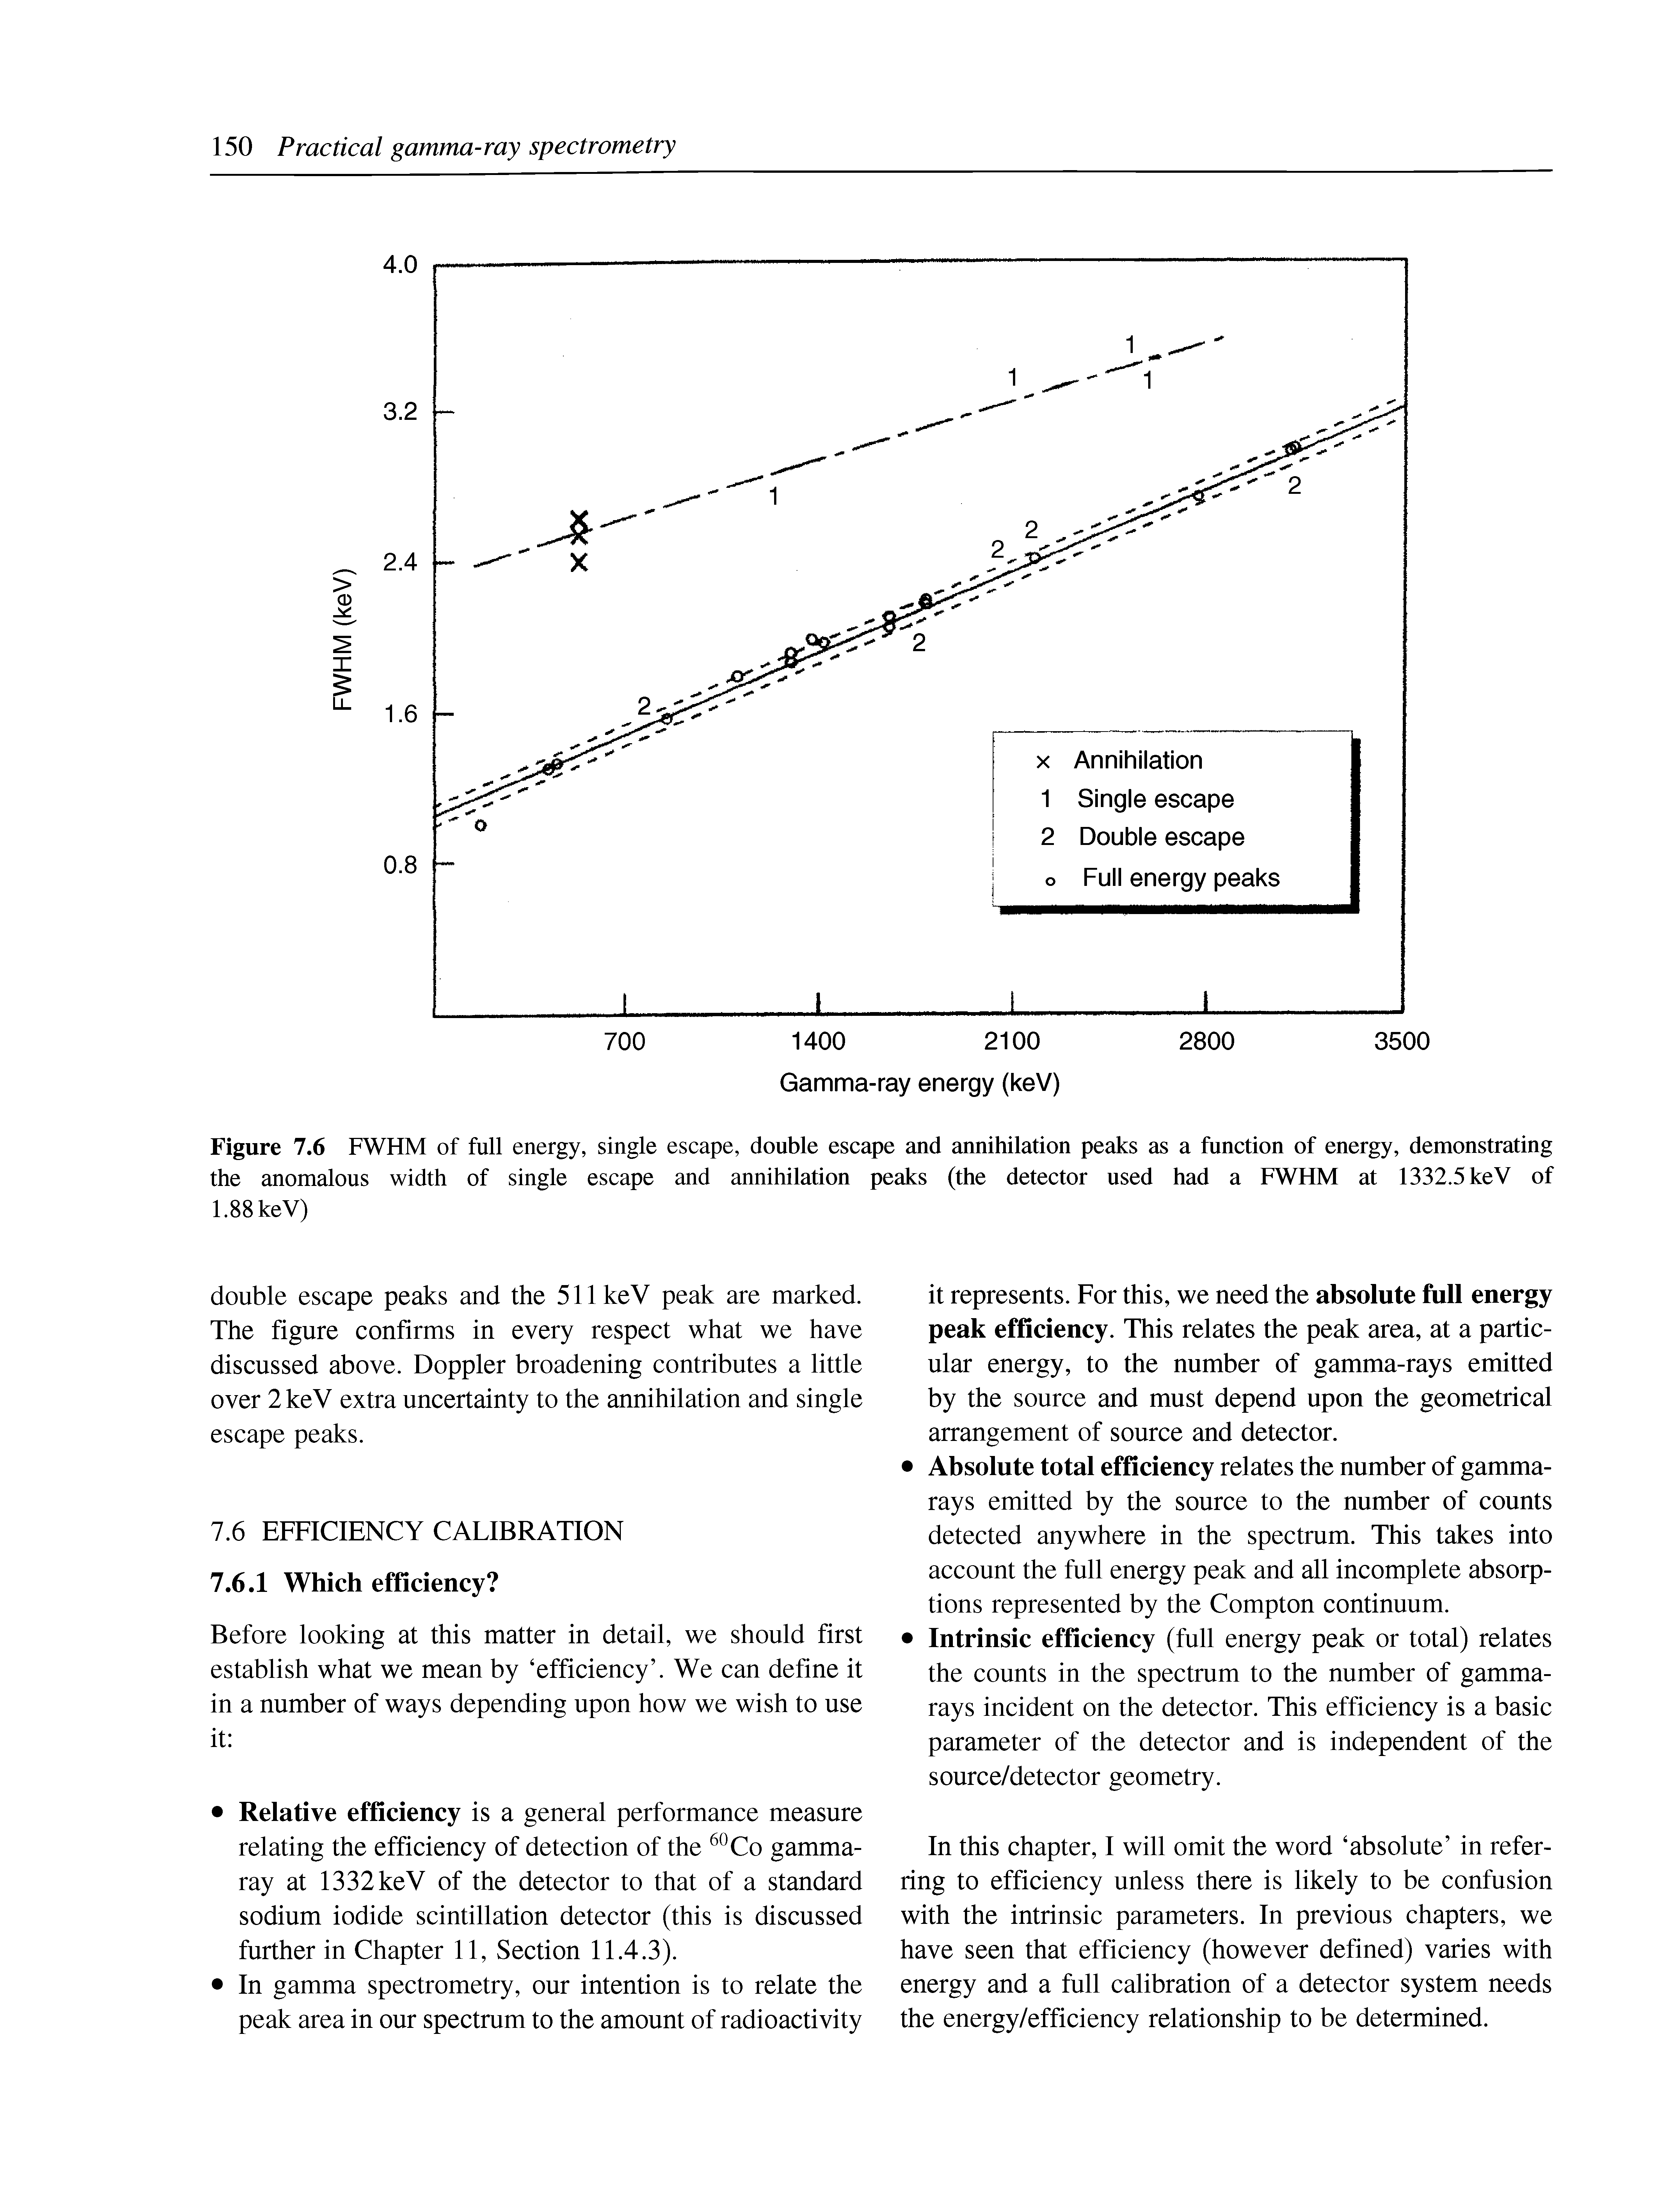 Figure 7.6 FWHM of full energy, single escape, double escape and annihilation peaks as a function of energy, demonstrating the anomalous width of single escape and annihilation peaks (the detector used had a FWHM at 1332.5 keV of 1.88 keV)...